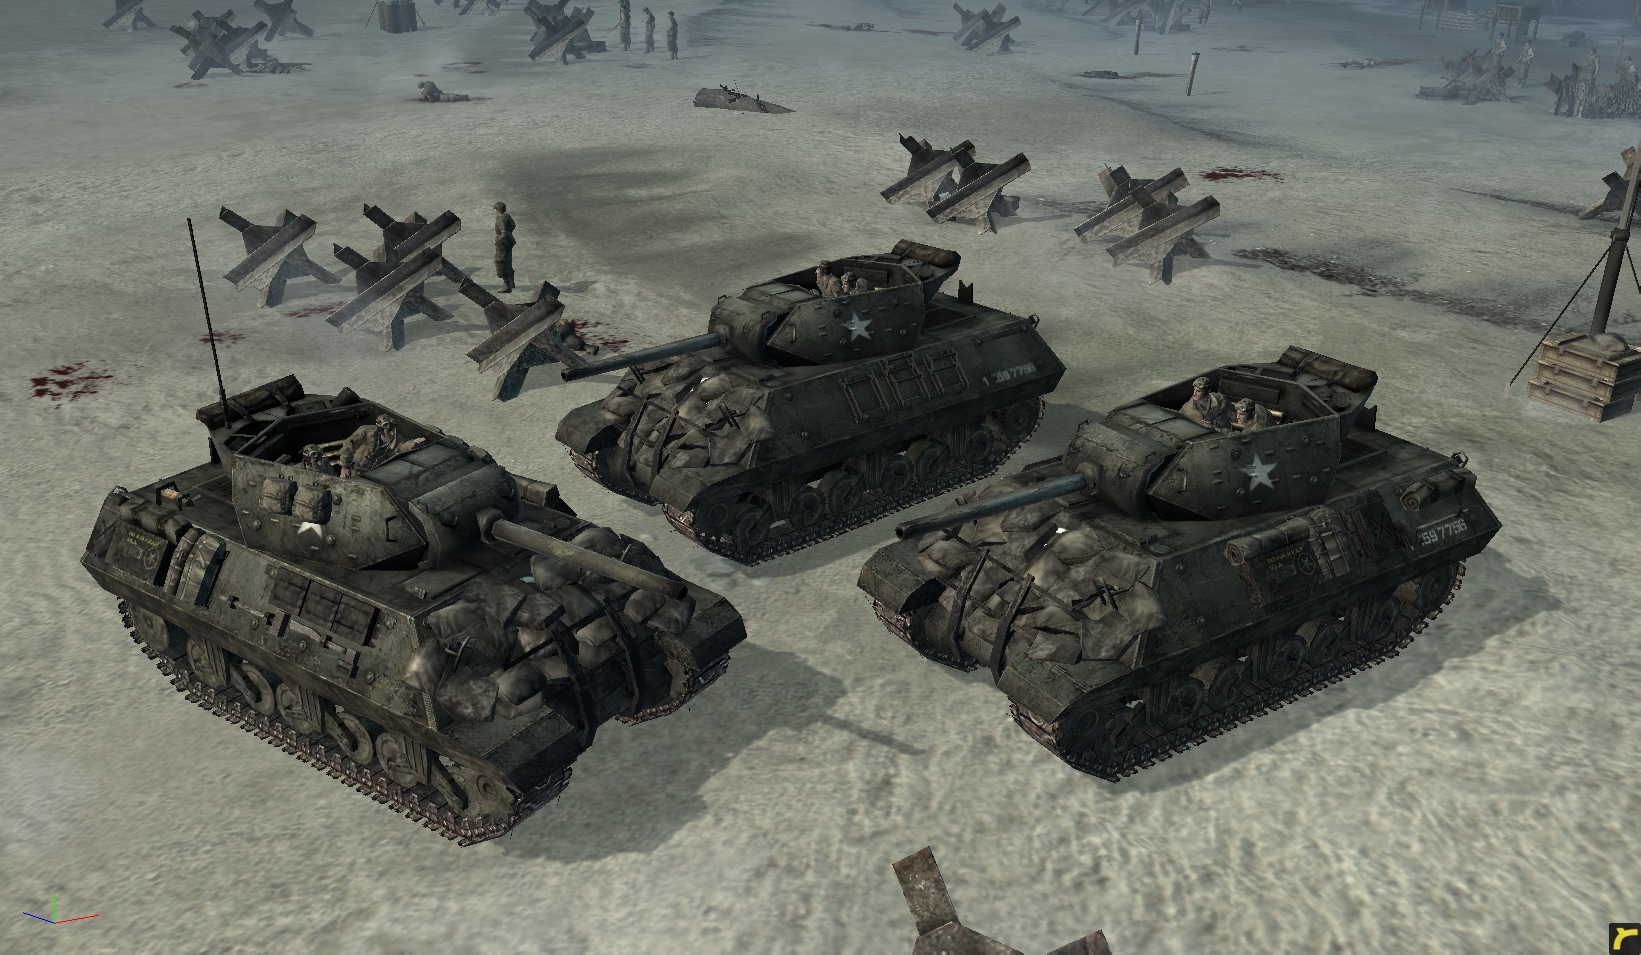 M 10 games. M10 Wolverine COH. Company of Heroes танк м10. Company of Heroes 2 Су 85. M10 Wolverine Sirocco.